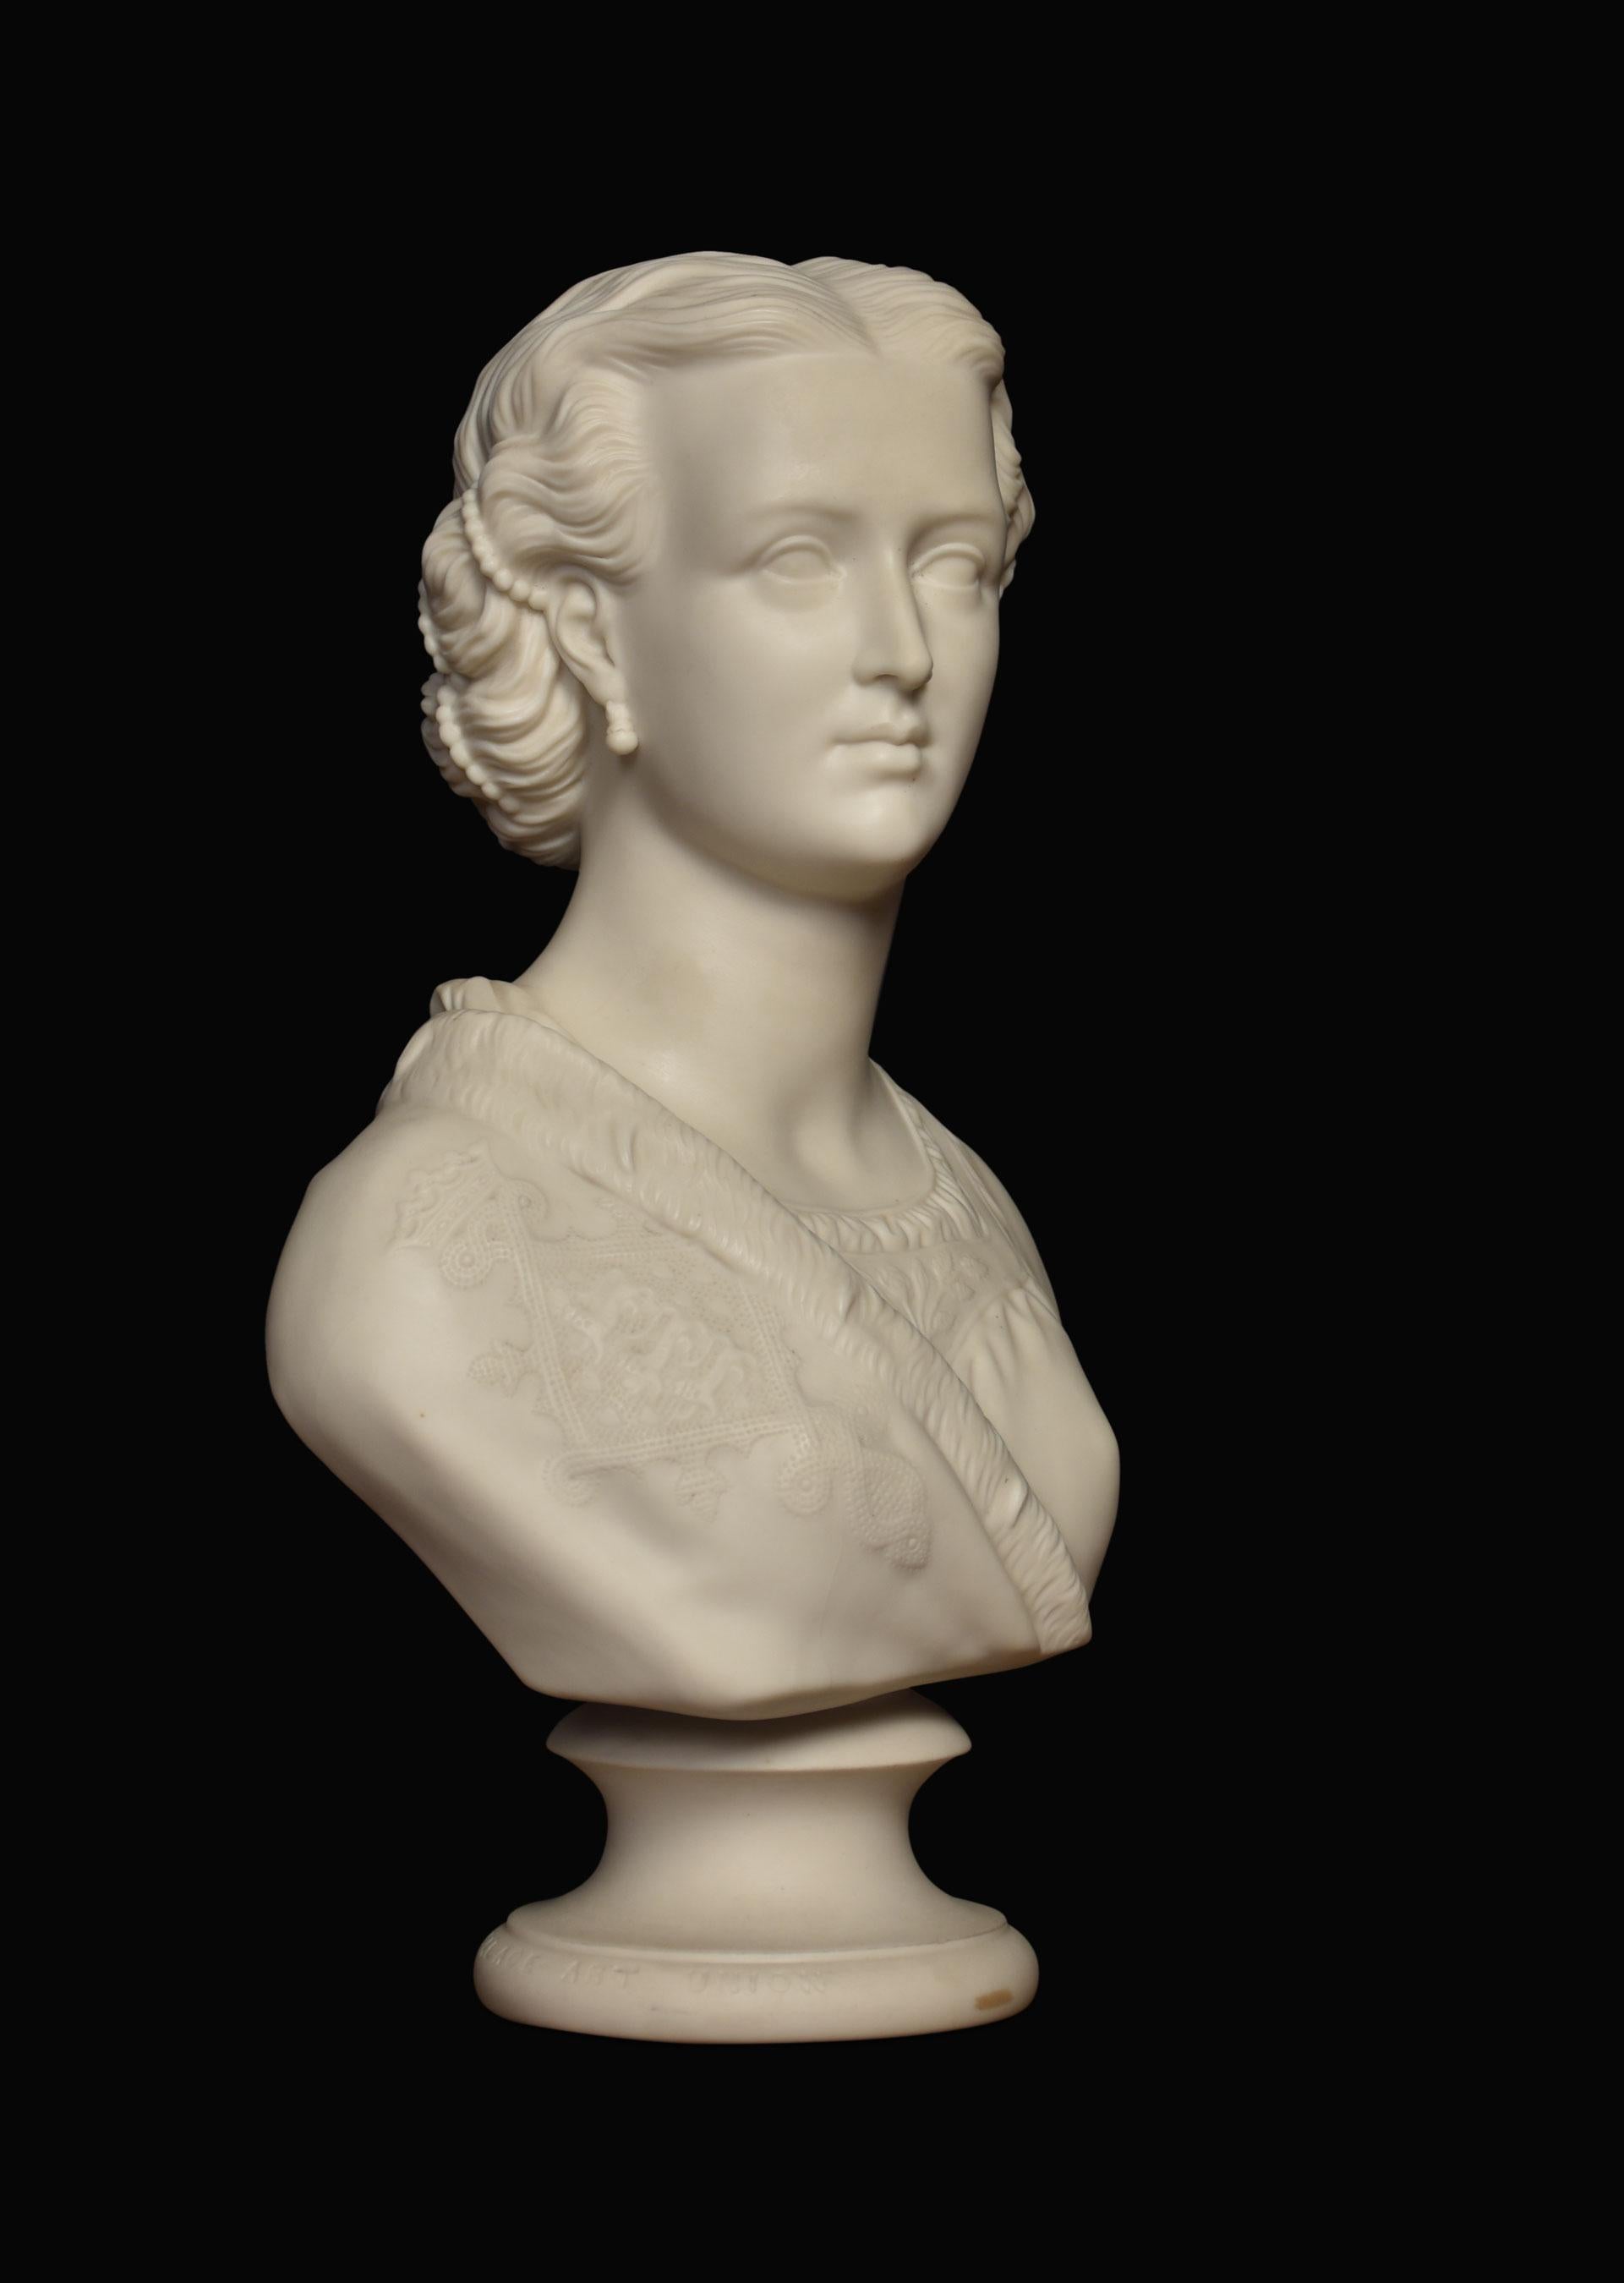 Copeland Parianware bust of a Royal Princess for Crystal Palace Art Union. Raised up on circular stepped base.
Dimensions
Height 11.5 inches
Width 7.5 inches
Depth 4.5 inches.